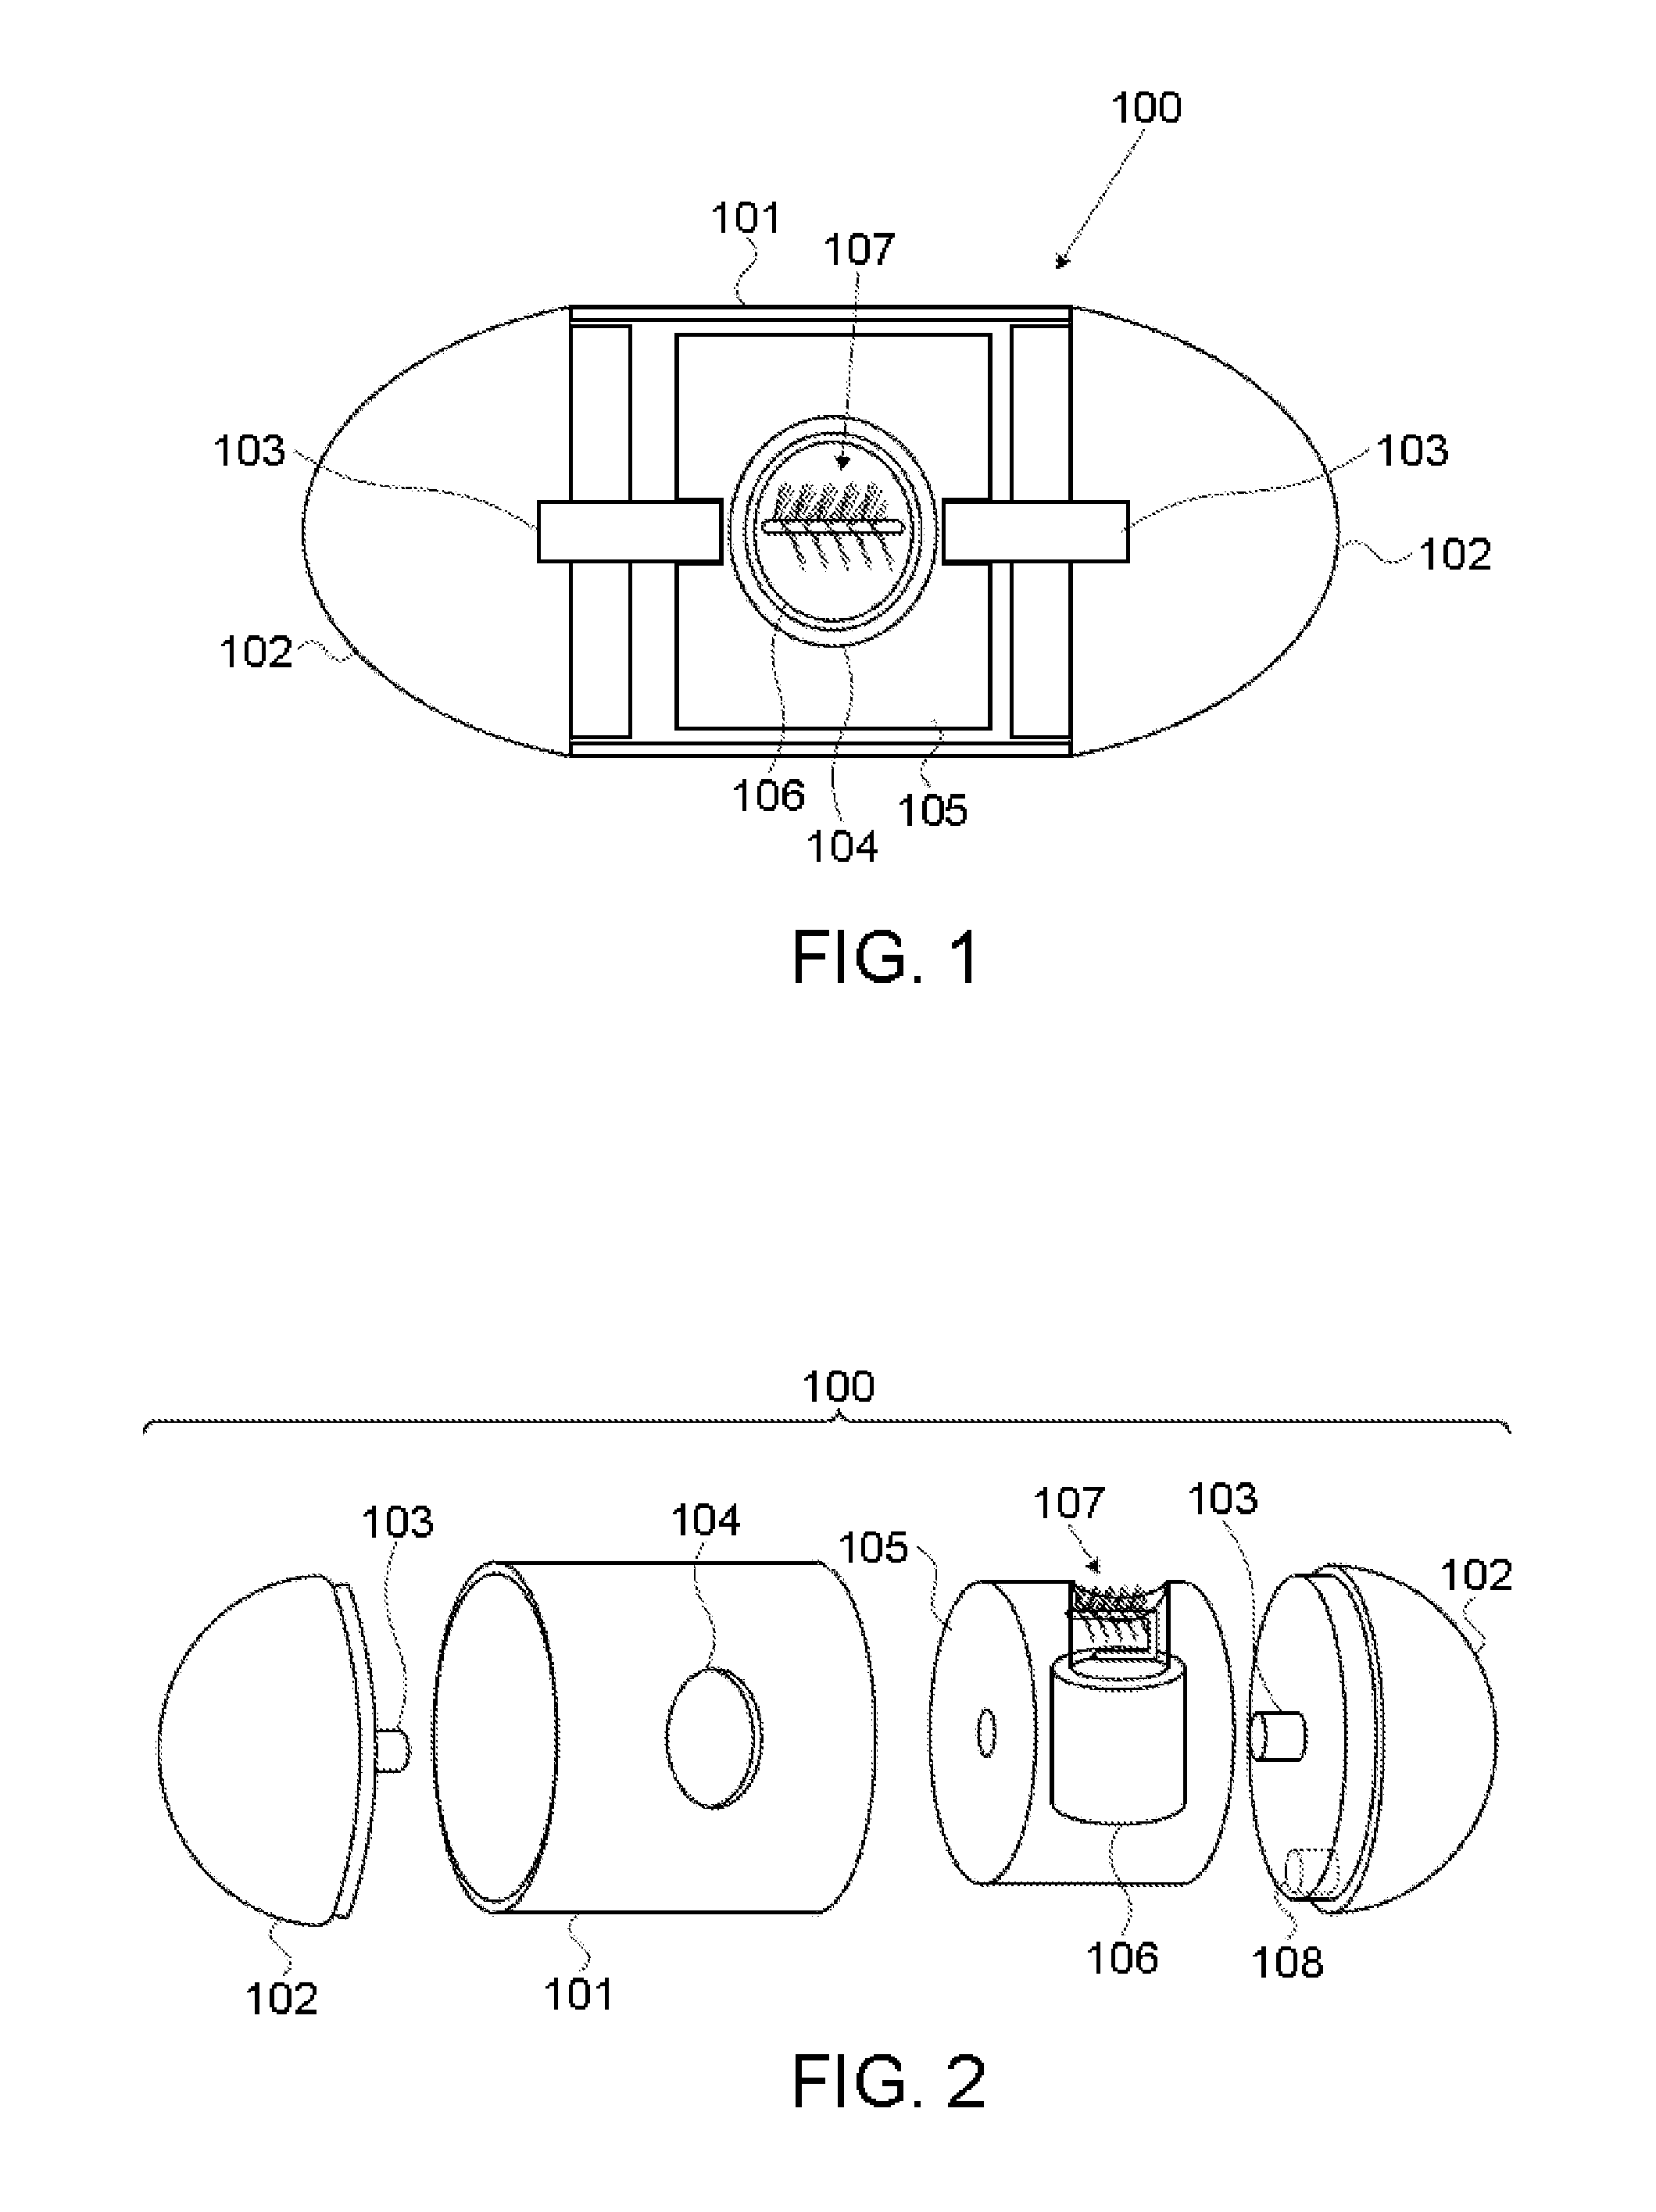 Device and method for in vivo cytology acquisition